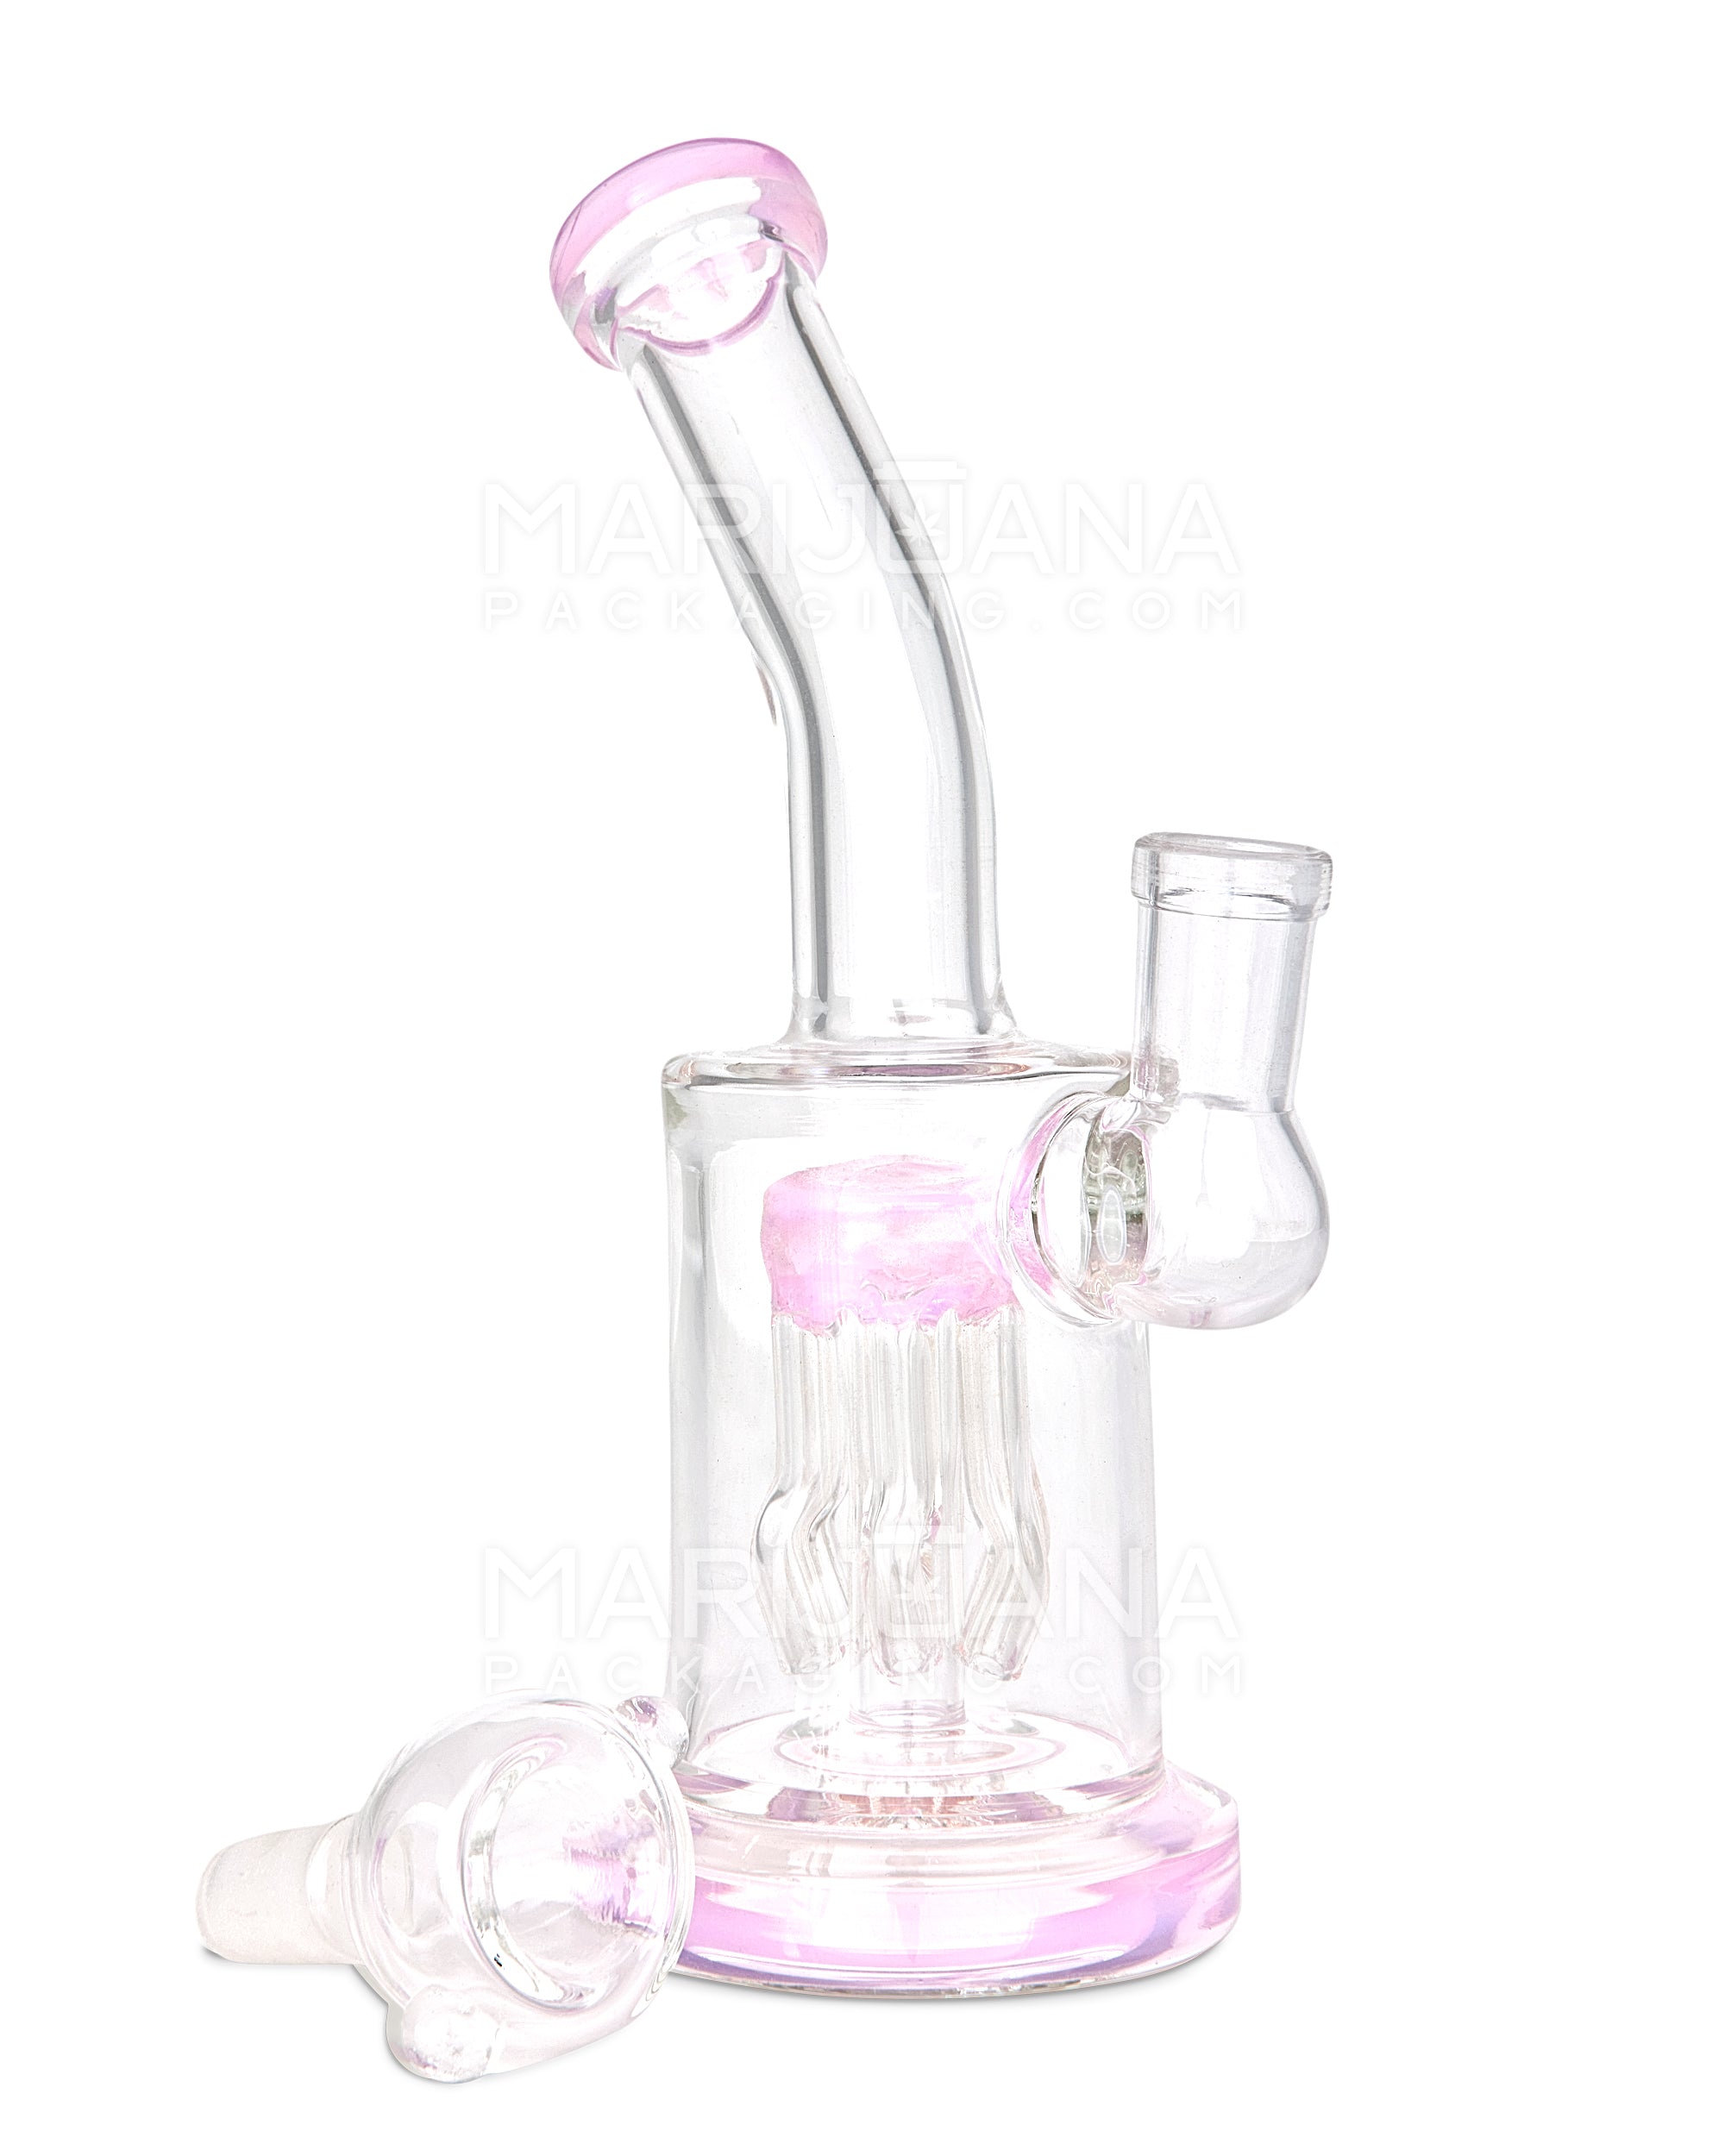 Bent Neck Tree Perc Glass Straight Water Pipe w/ Thick Base | 7in Tall - 14mm Bowl - Pink - 2